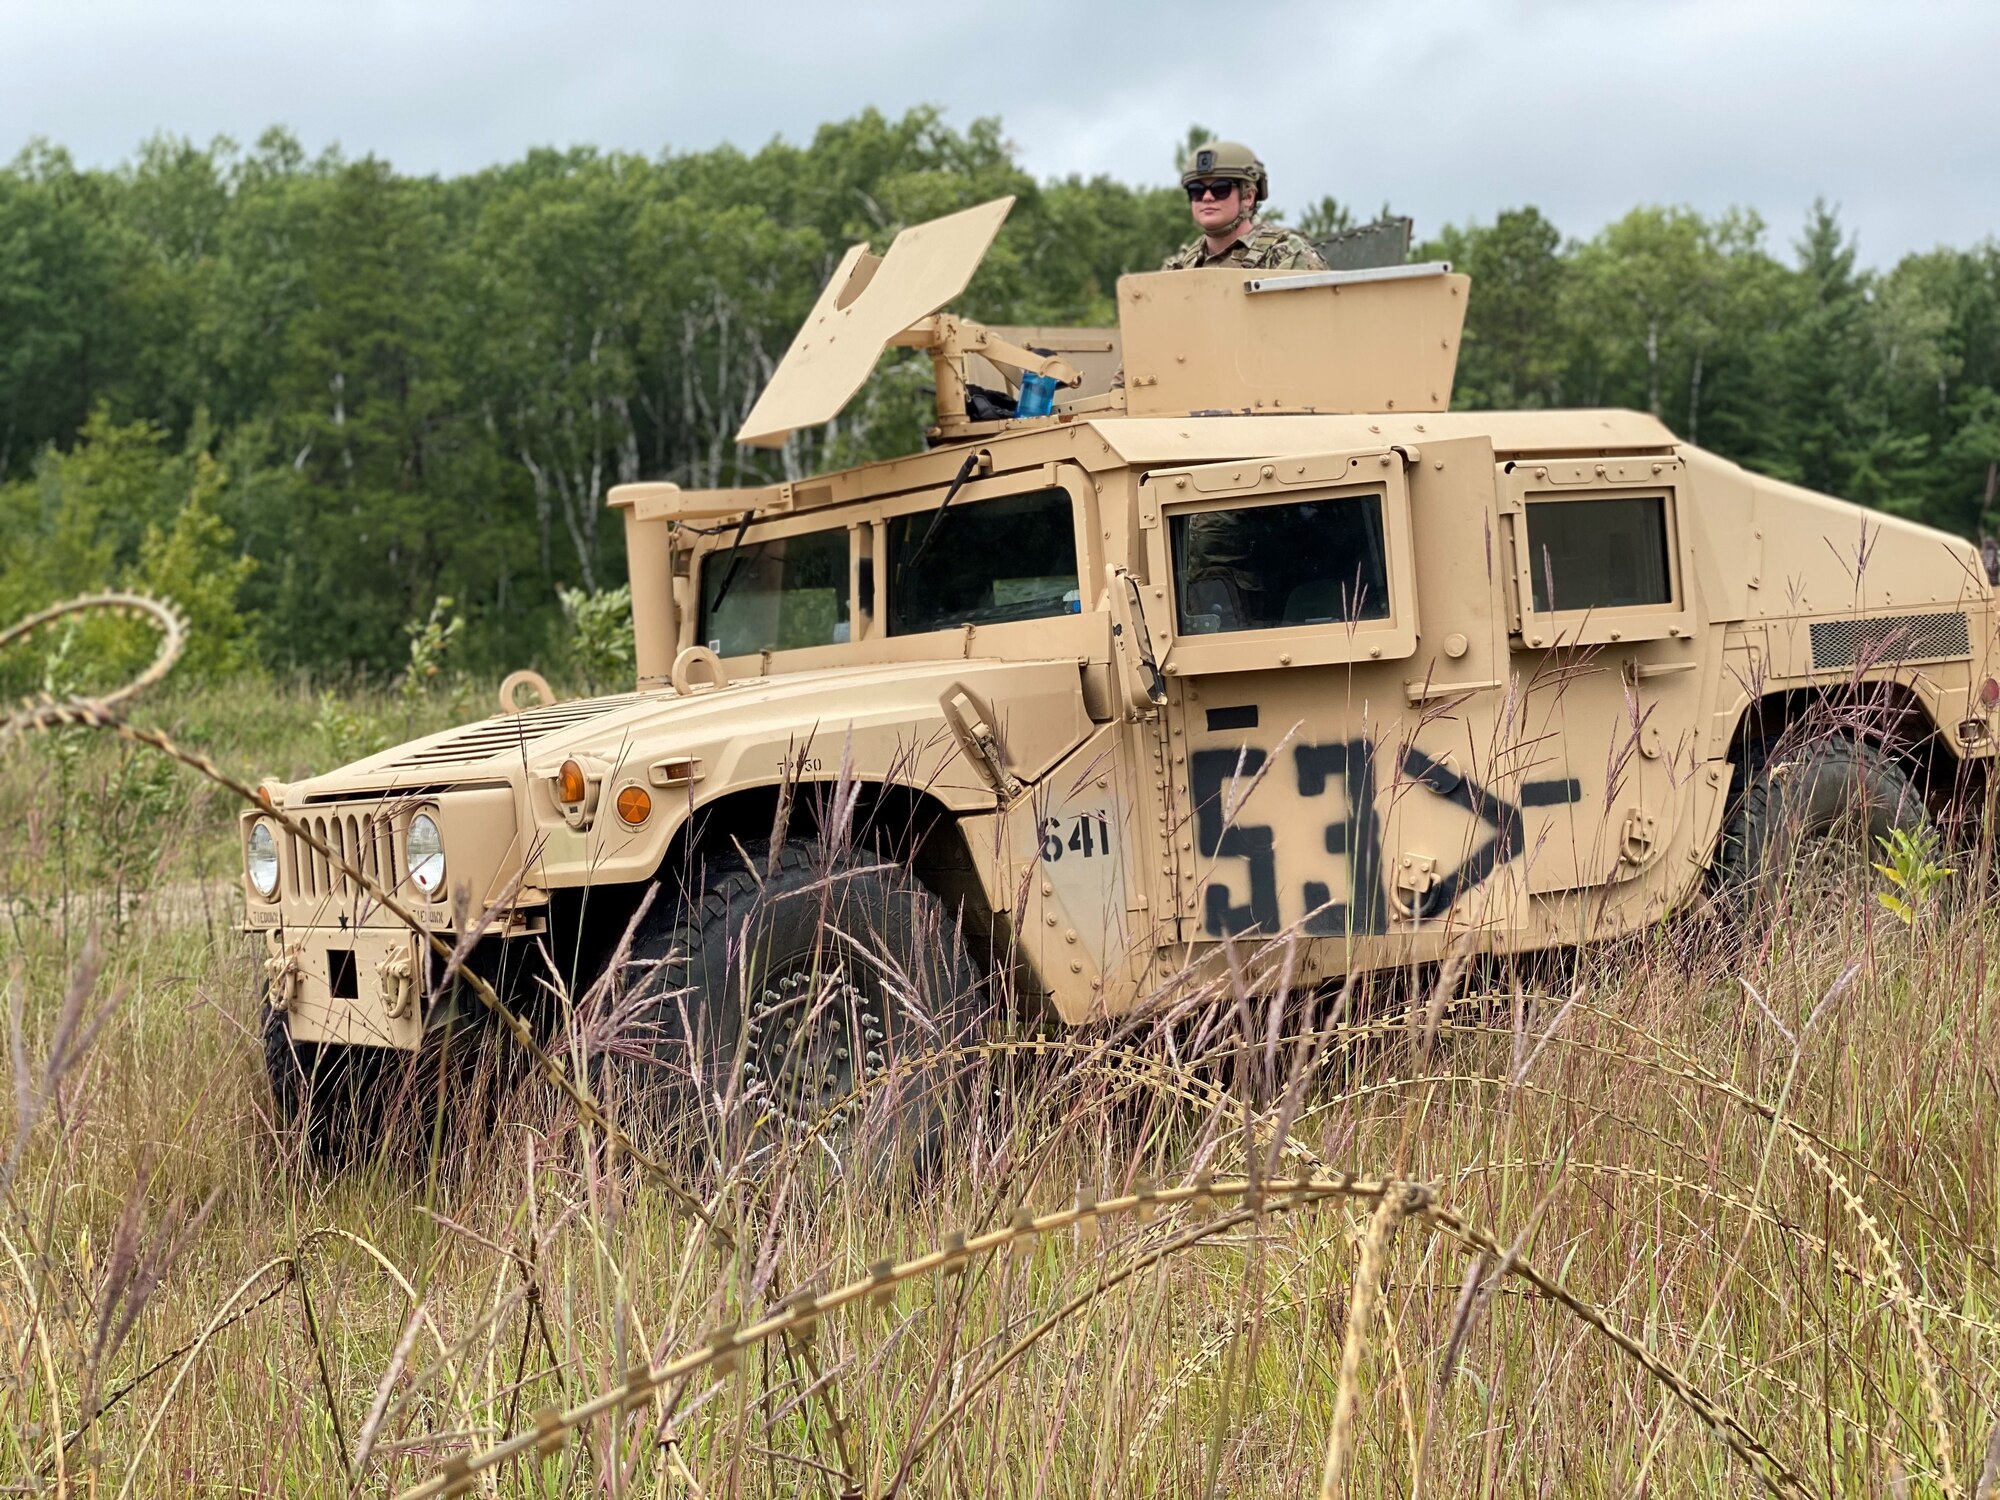 Airmen from the 148th Security Forces Squadron patrol a simulated forward operating base during a field training exercise (FTX) at Camp Ripley Training Center, Minnesota on August 13, 2020.